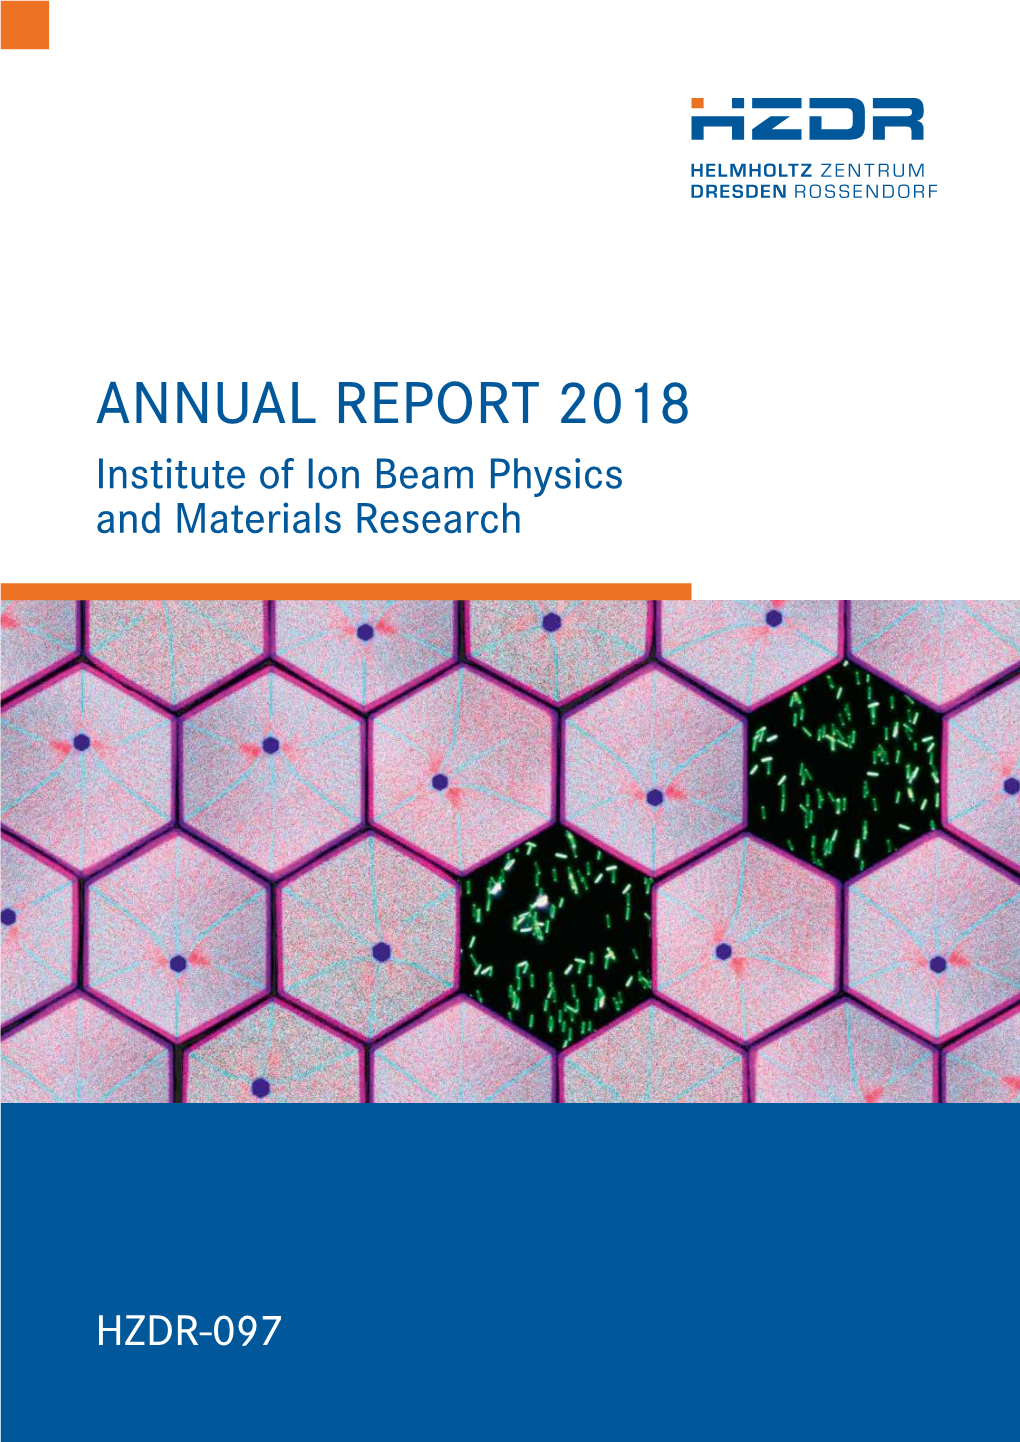 ANNUAL REPORT 2018 Institute of Ion Beam Physics and Materials Research